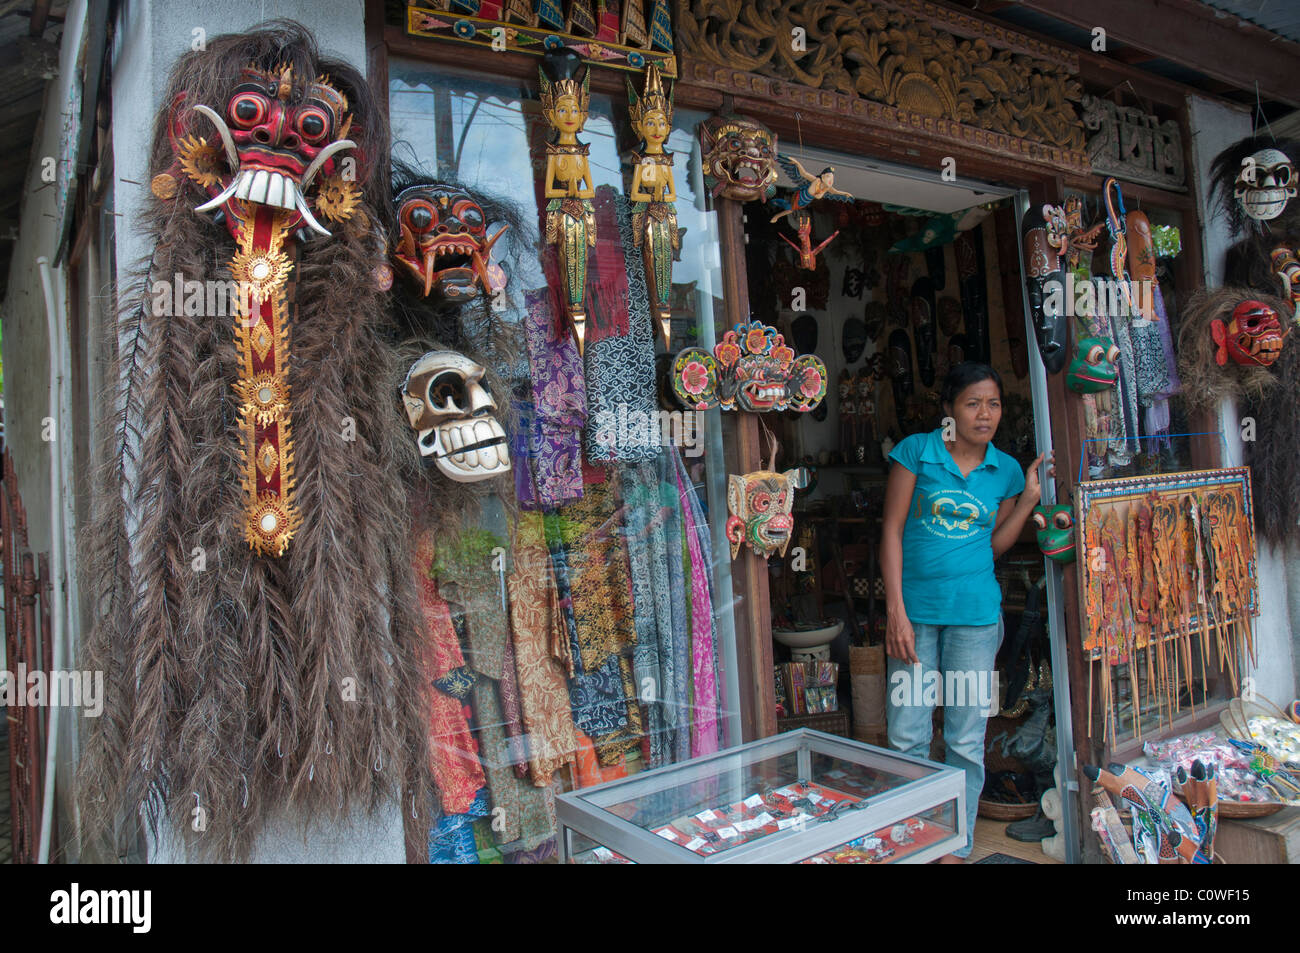 Souvenir shop selling Balinese dance masks and other Balinese crafts in Jalan Hanuman, Monkey Forest Road, Ubud, Bali. Indonesia Stock Photo